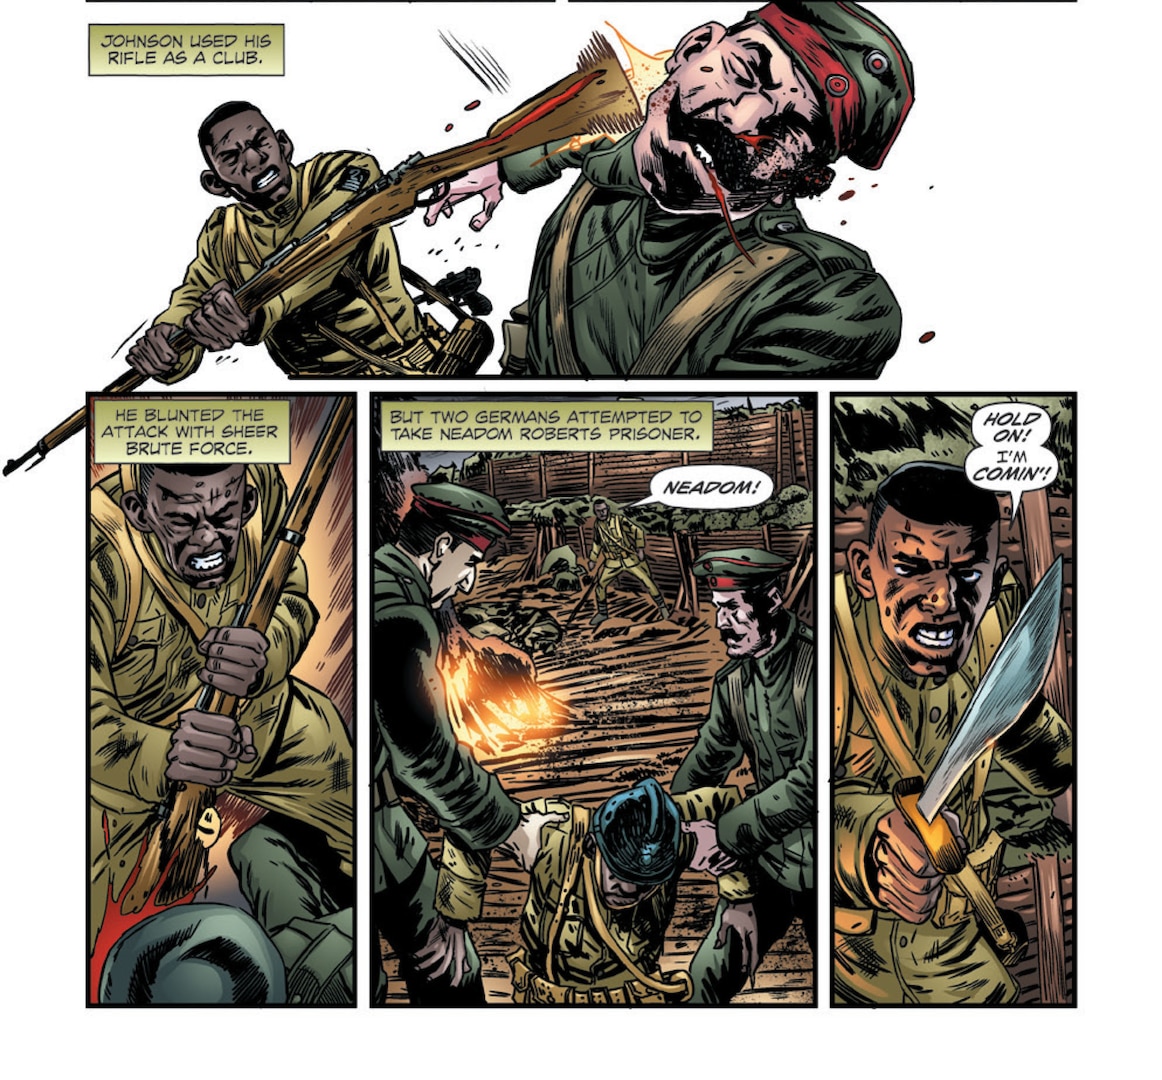 Sgt. Henry Johnson, a New York National Guard Soldier who was awarded the Medal of Honor posthumously for his actions during World War I, attacks a German Soldier in these panels from a digital graphic novel about Johnson released by the Association of the United States Army. Johnson, a railroad porter in Albany, N.Y., was a member of the New York National Guard's 369th Infantry.